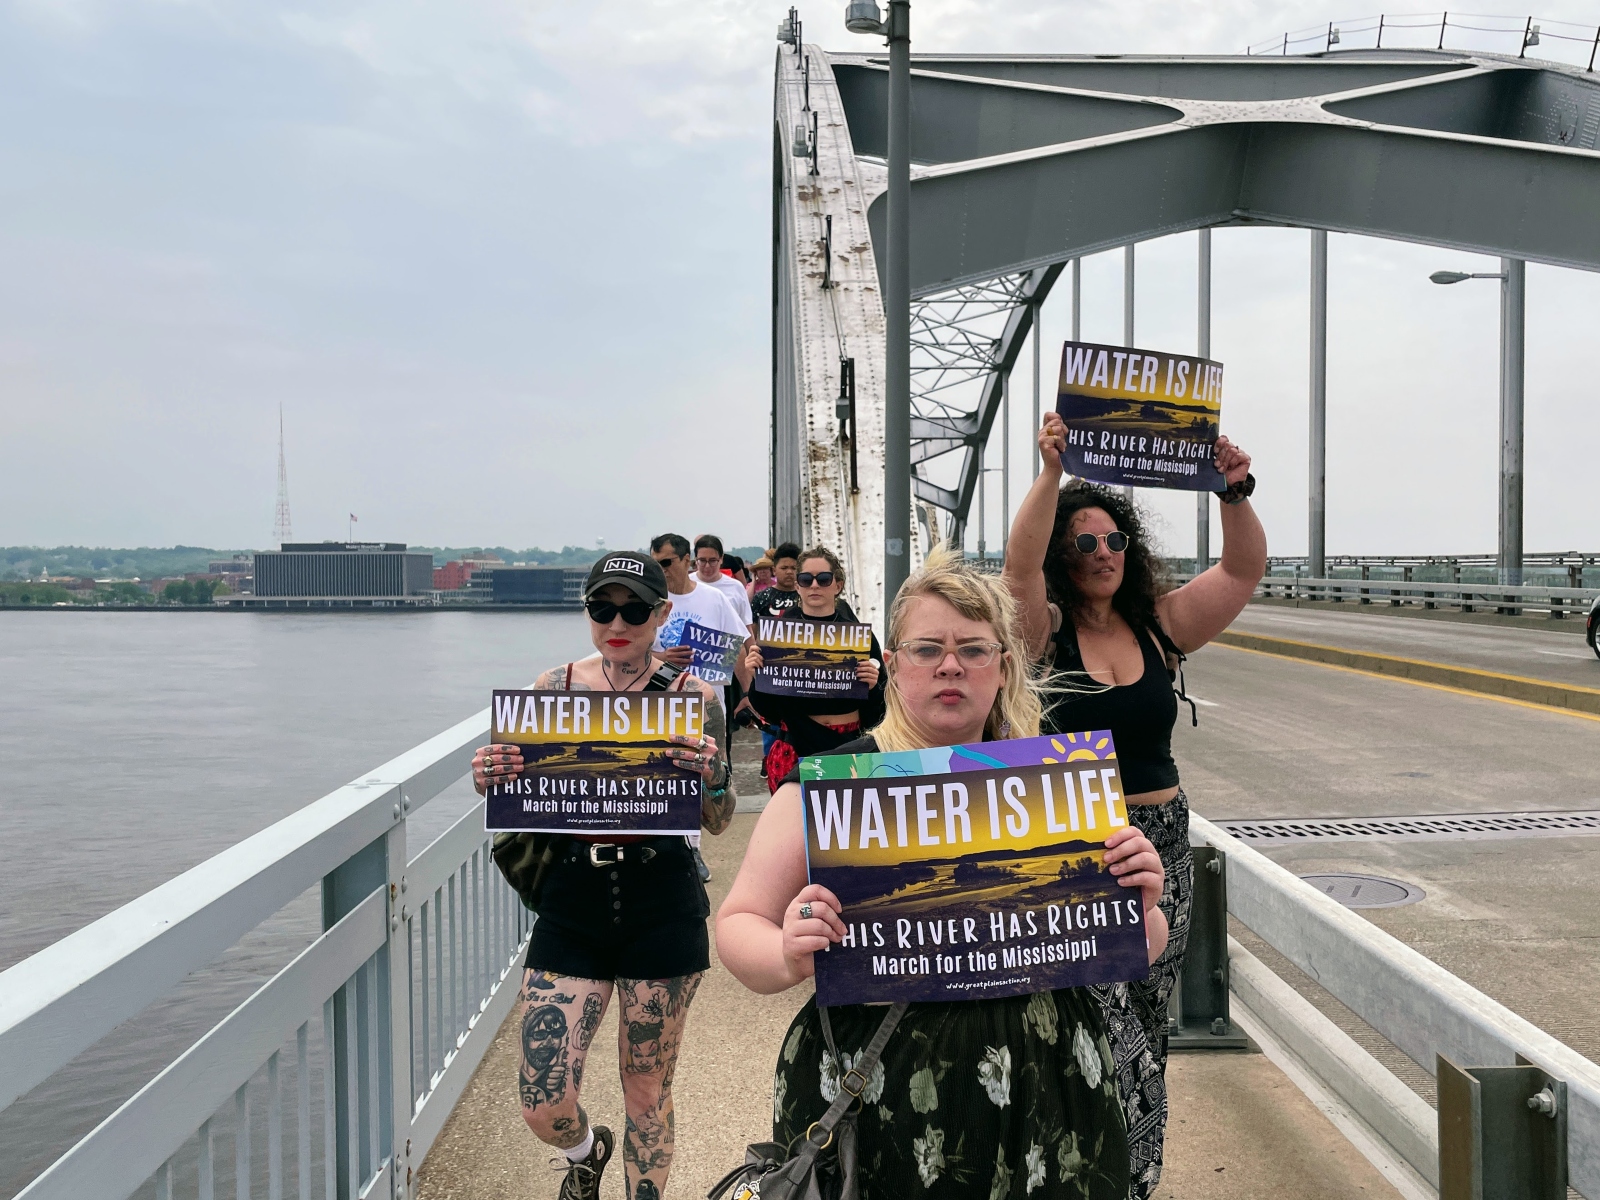 A group of young people walks on a bridge over a river with "water is life" signs.